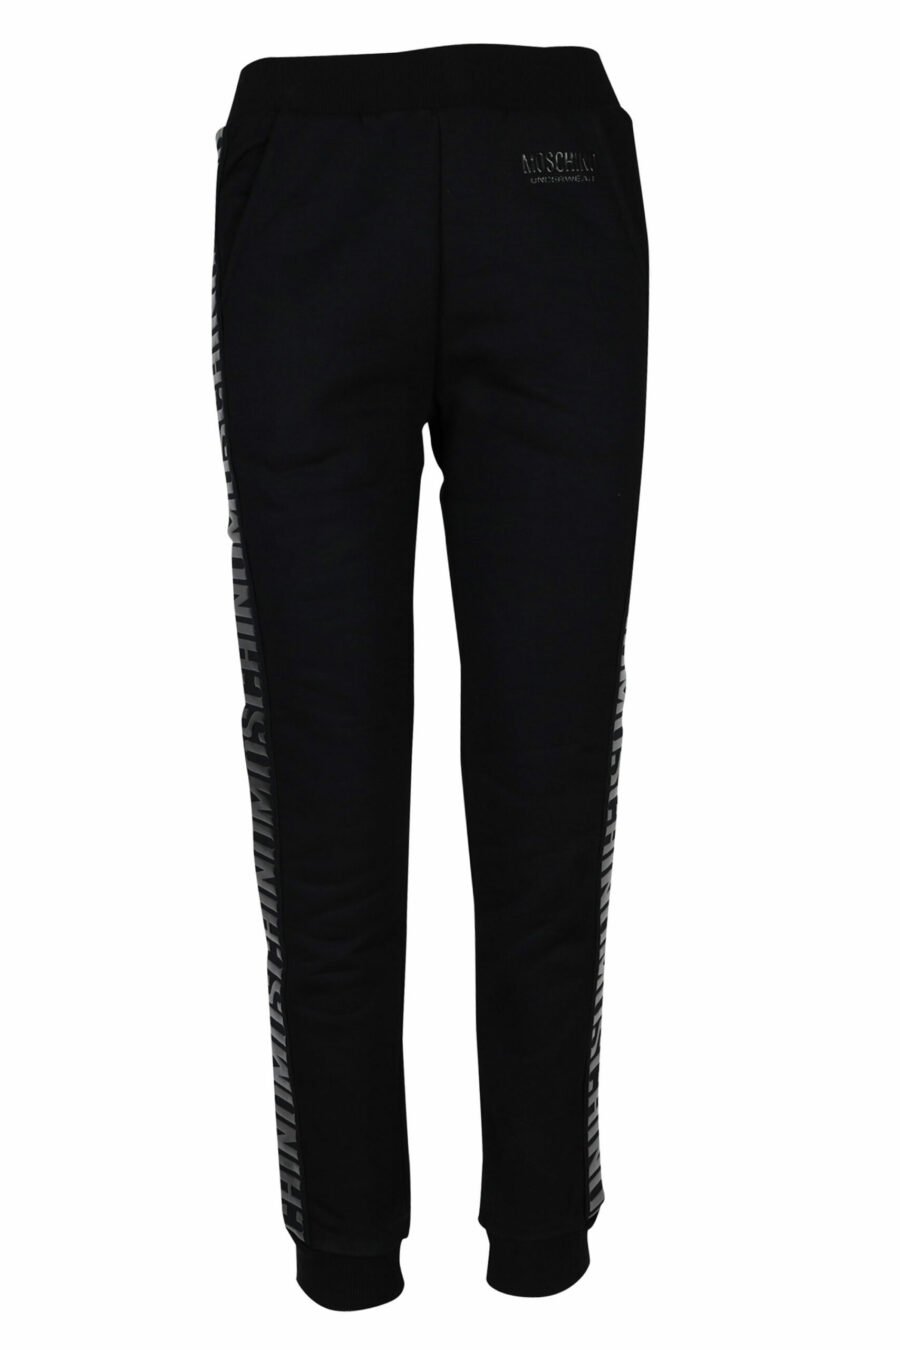 Tracksuit bottoms black with monochrome ribbon logo on sides - 889316614978 scaled